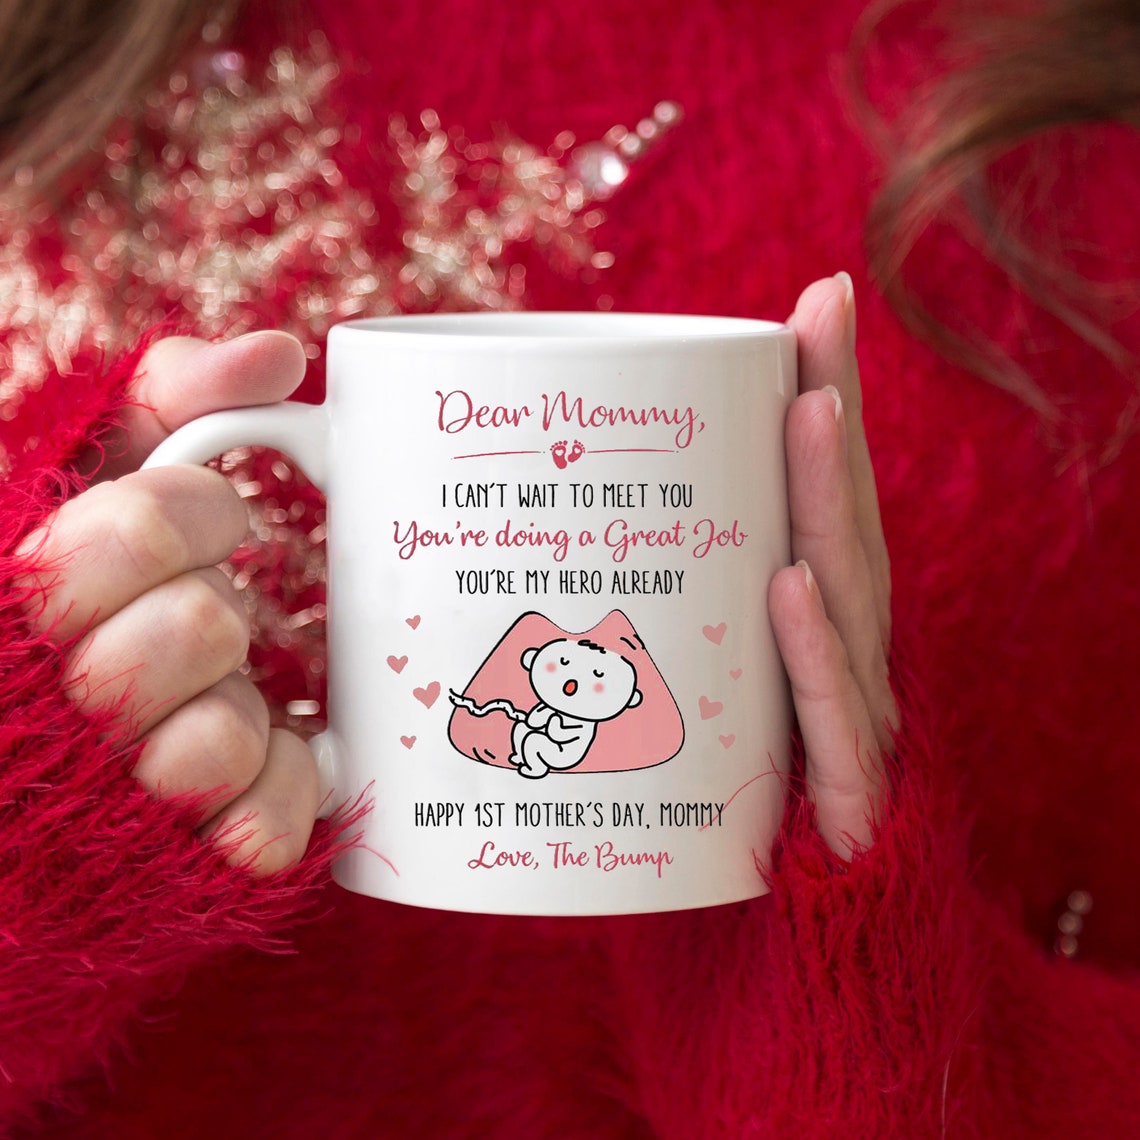 You're Doing A Great Job - Personalized Custom Mother's Day Mug